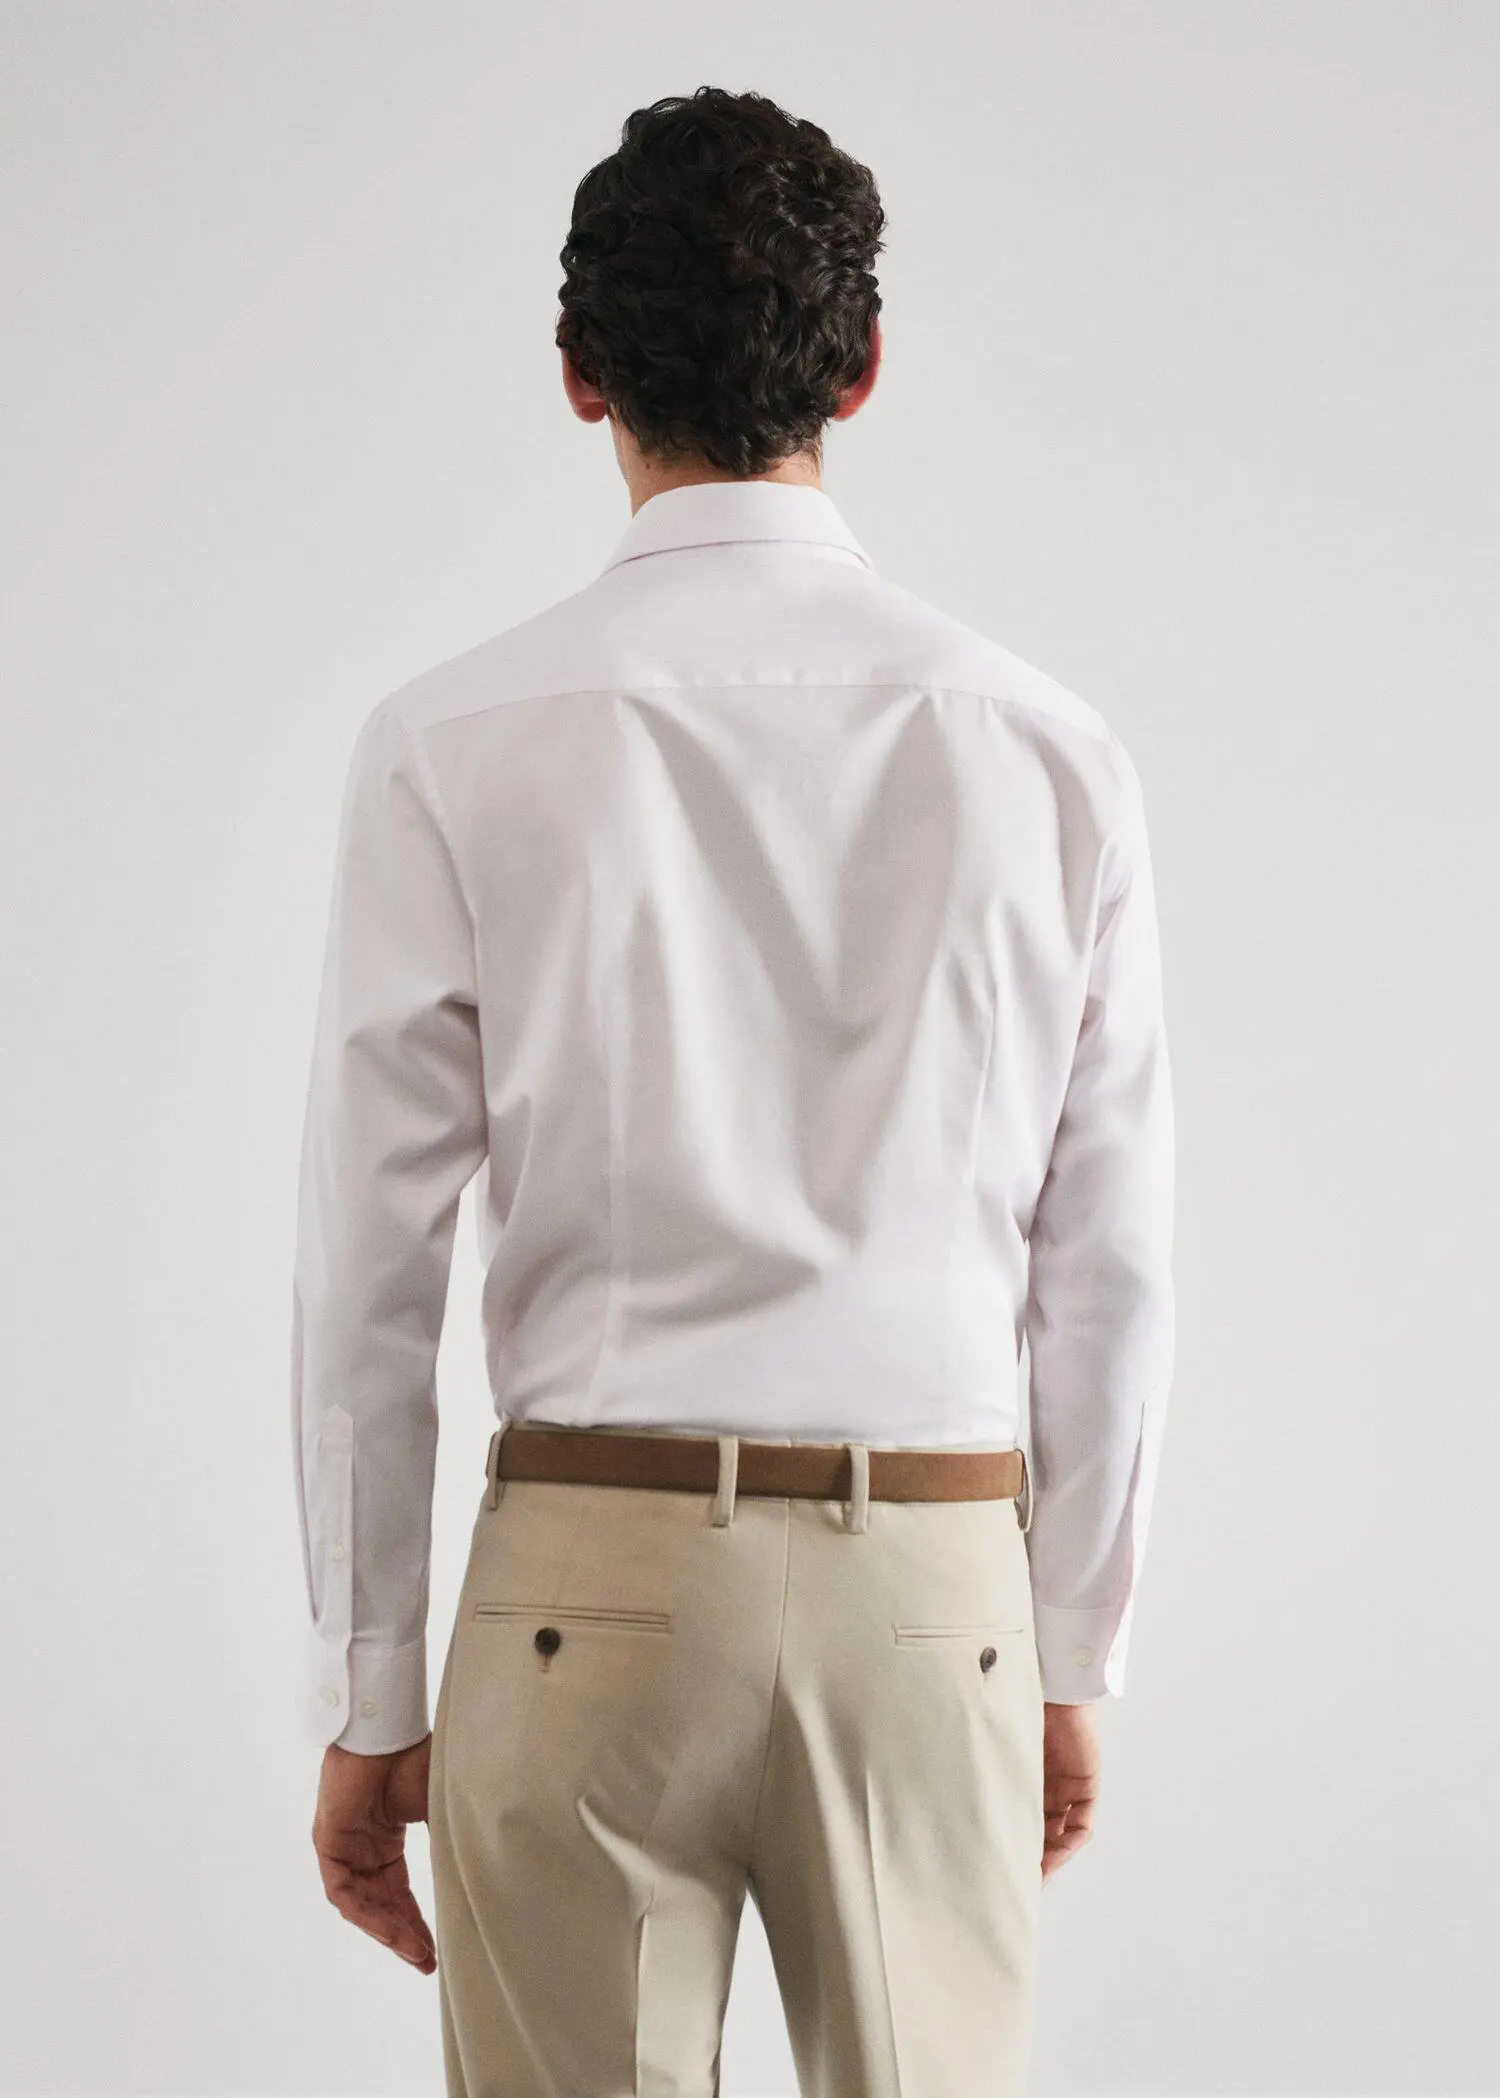 Mango Slim-fit micro-stripe twill suit shirt. a man in a white shirt and beige pants. 